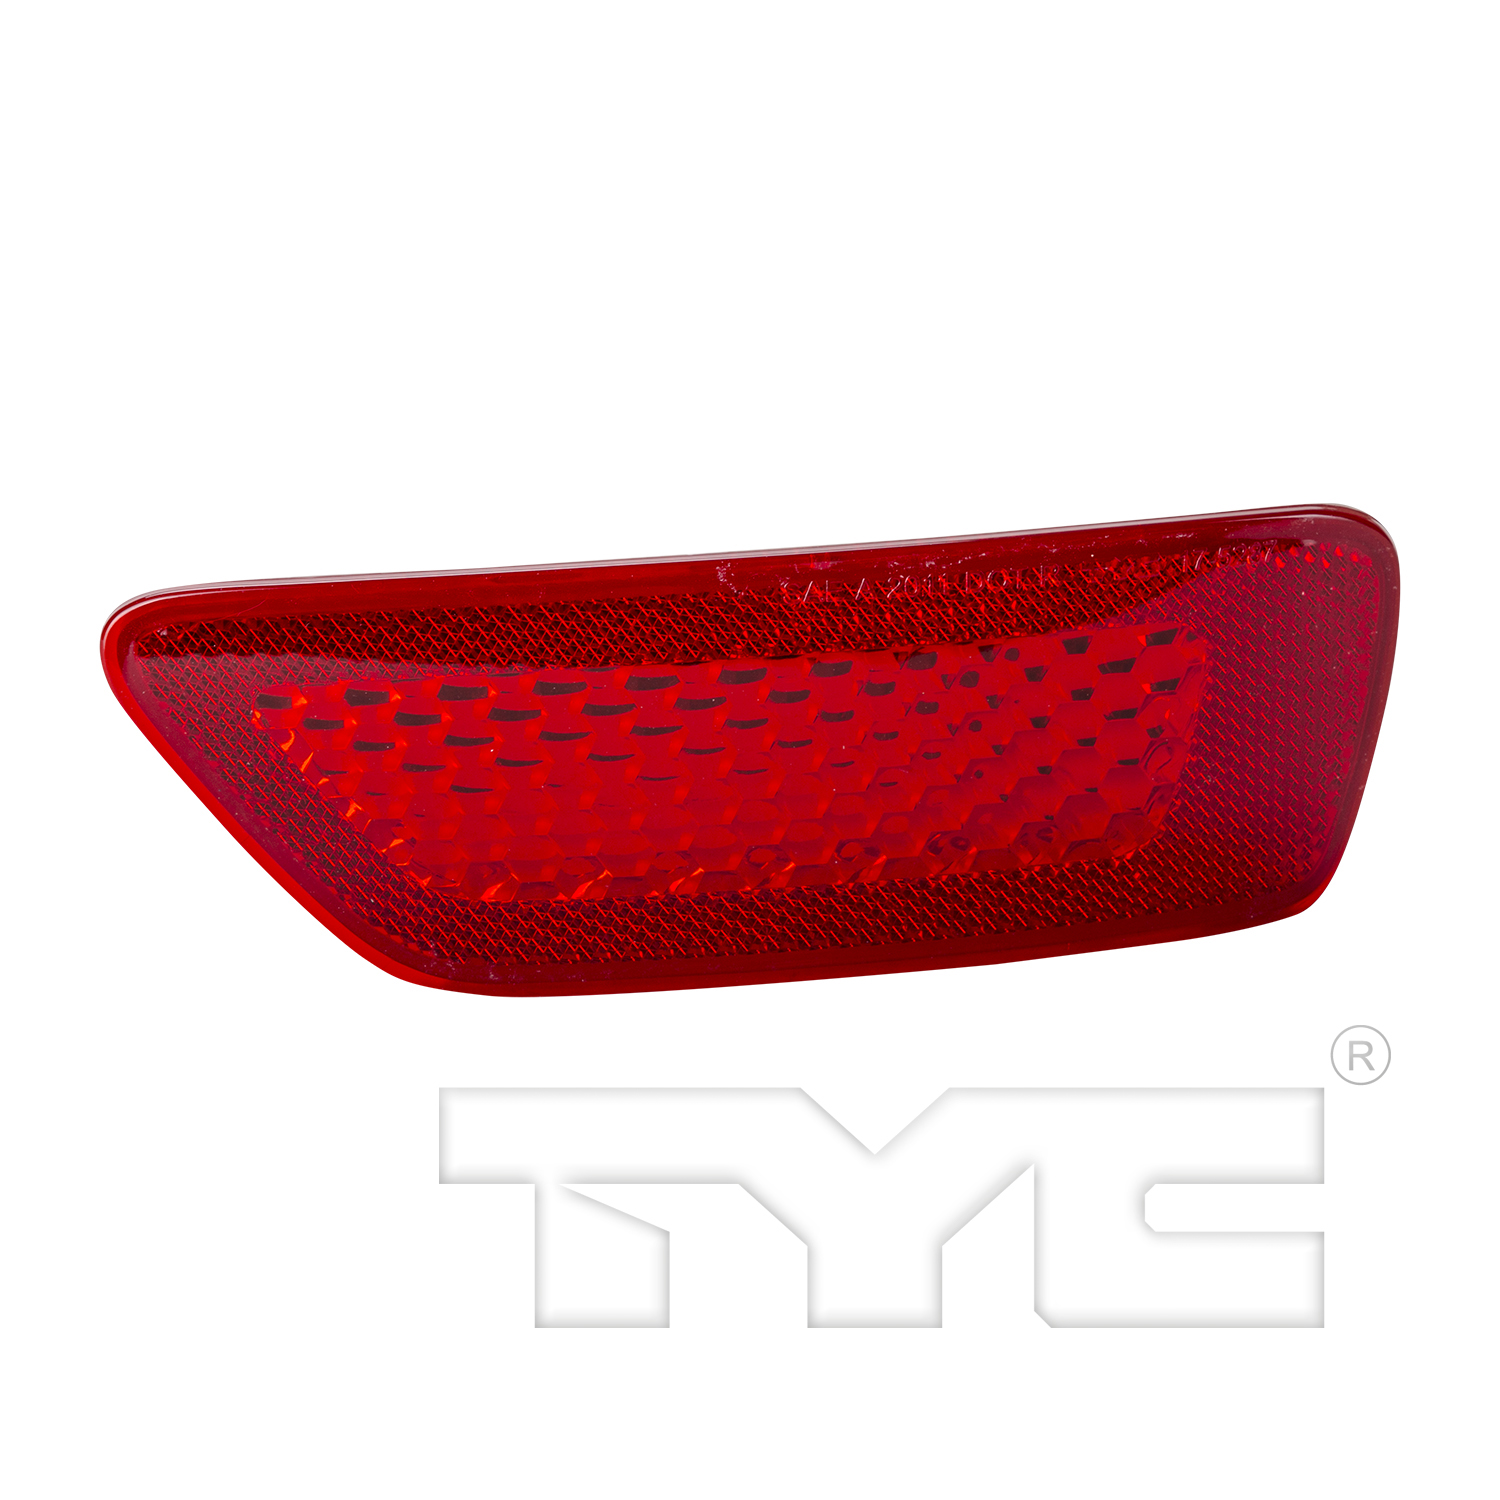 Aftermarket LAMPS for JEEP - GRAND CHEROKEE WK, GRAND CHEROKEE WK,22-22,RT Rear bumper reflector